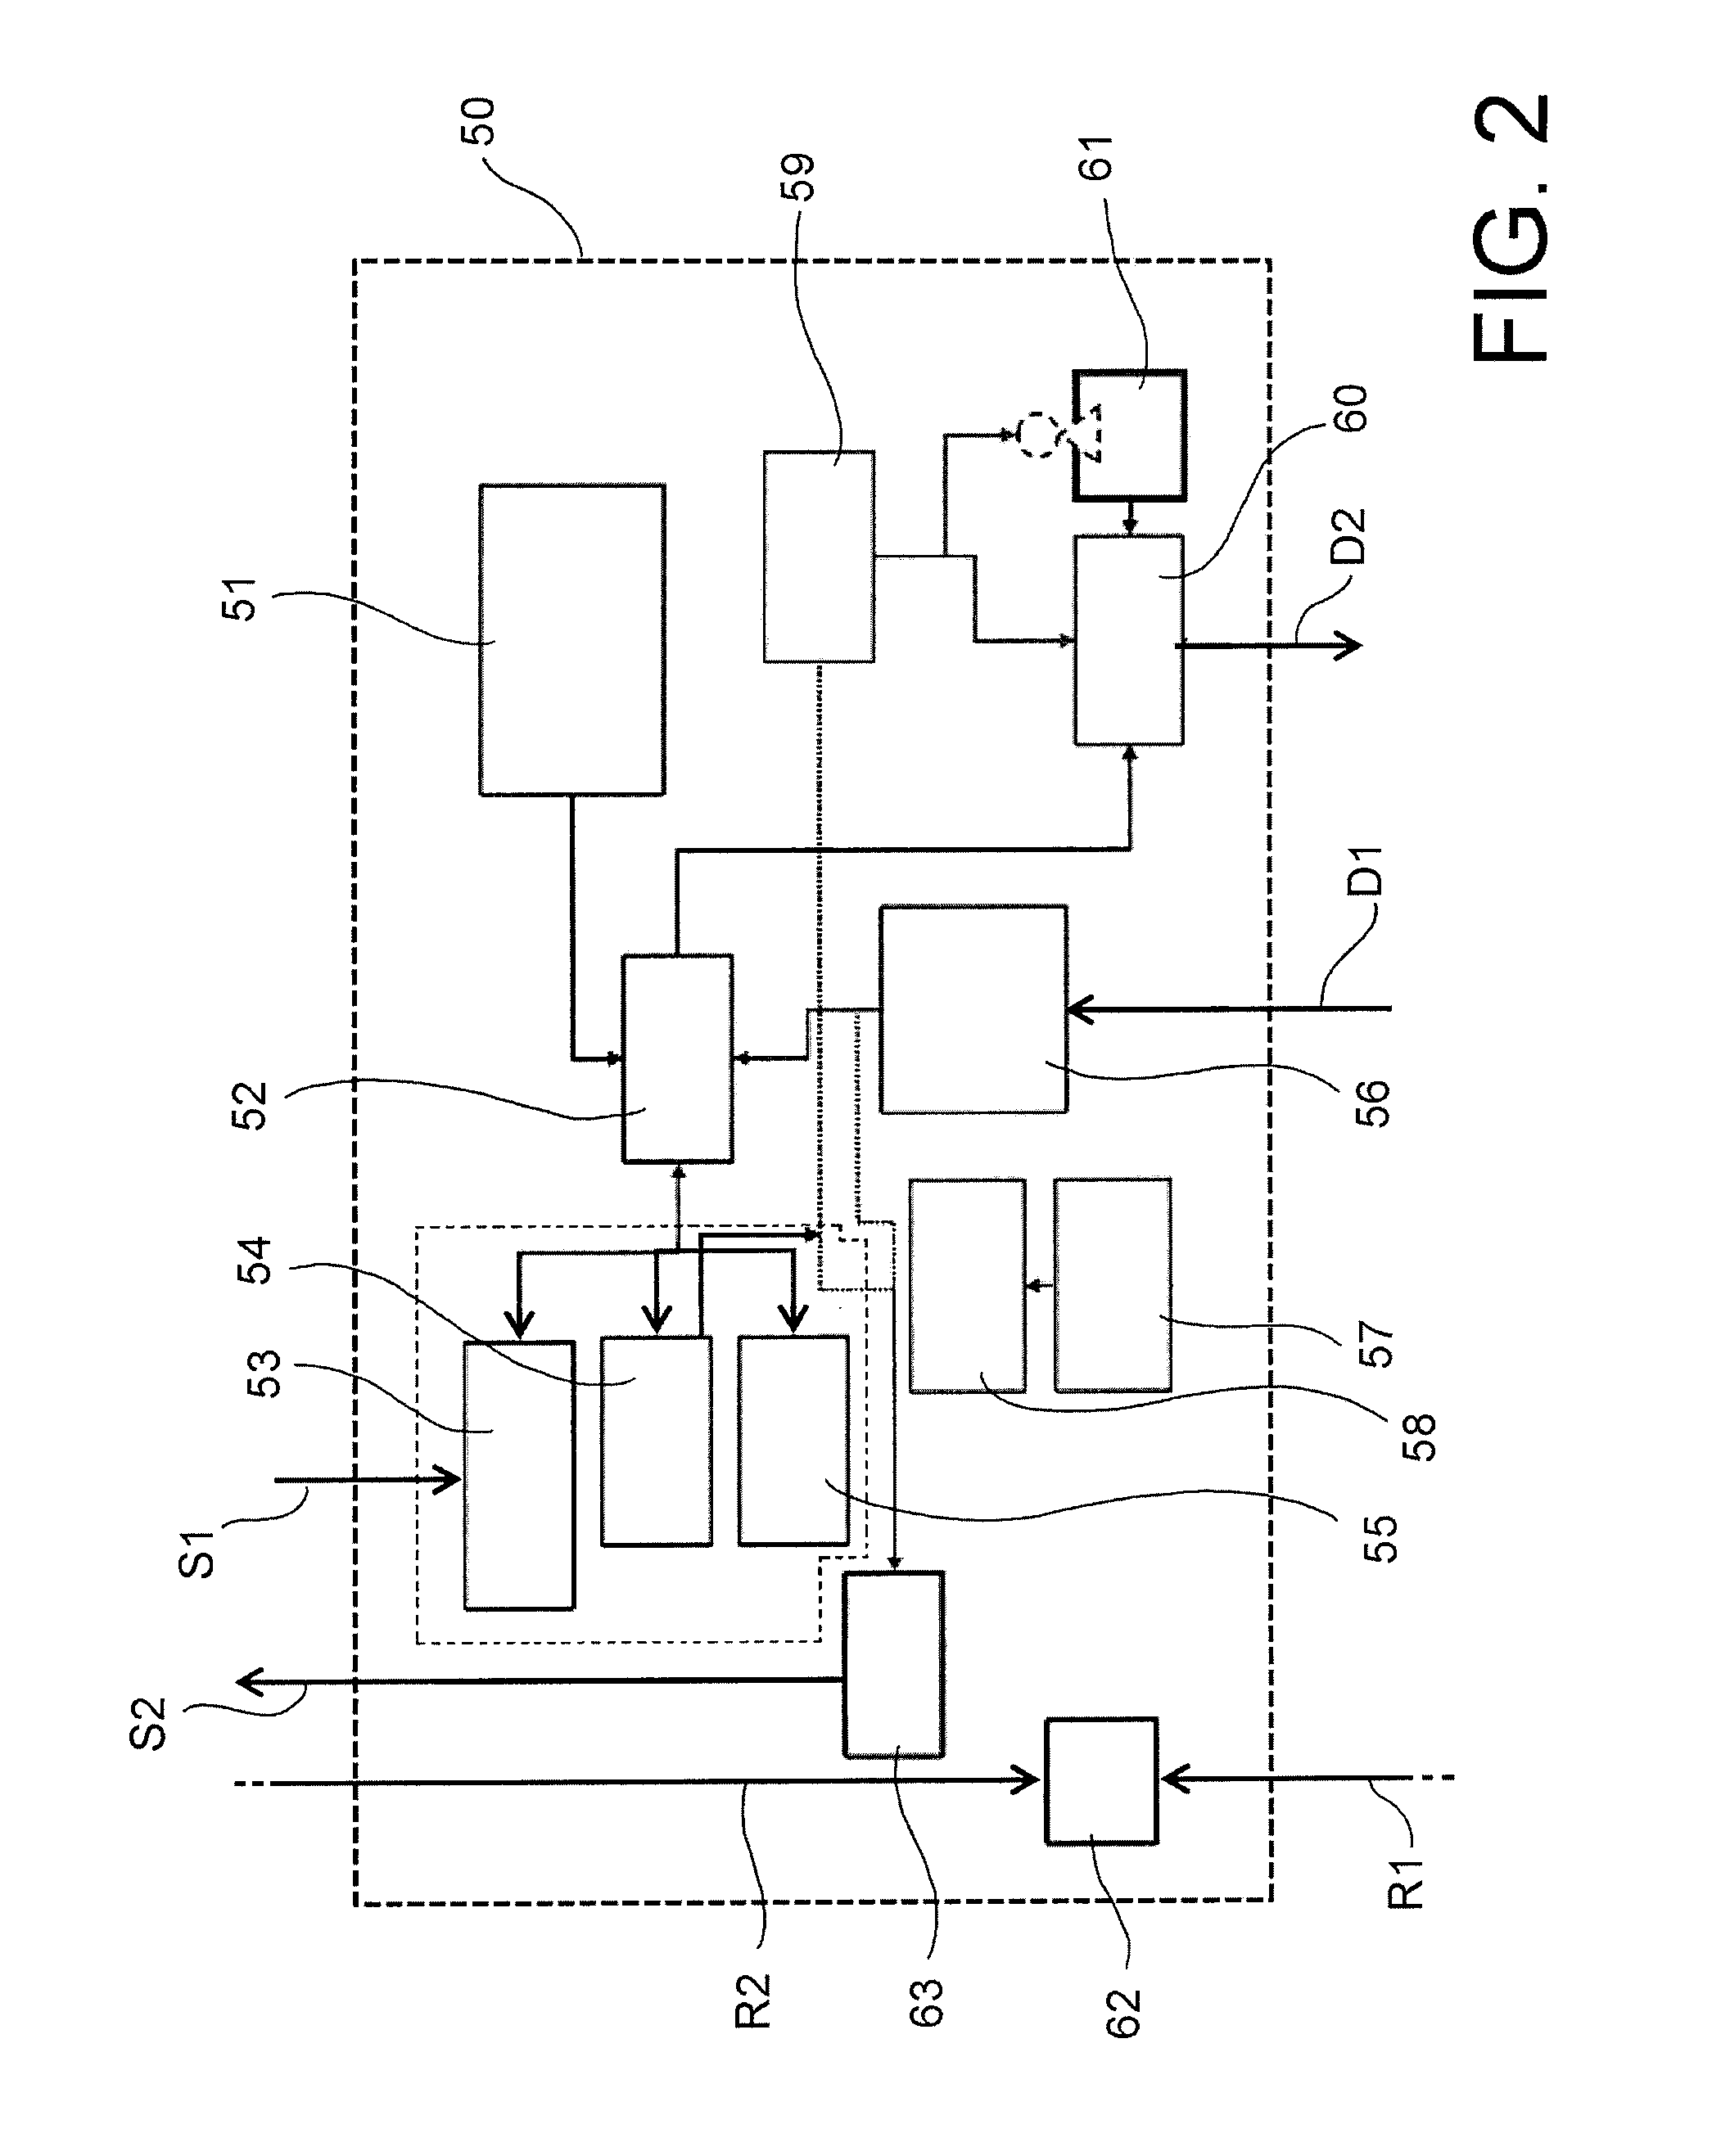 Apparatus and Method for Rehabilitation Employing a Game Engine